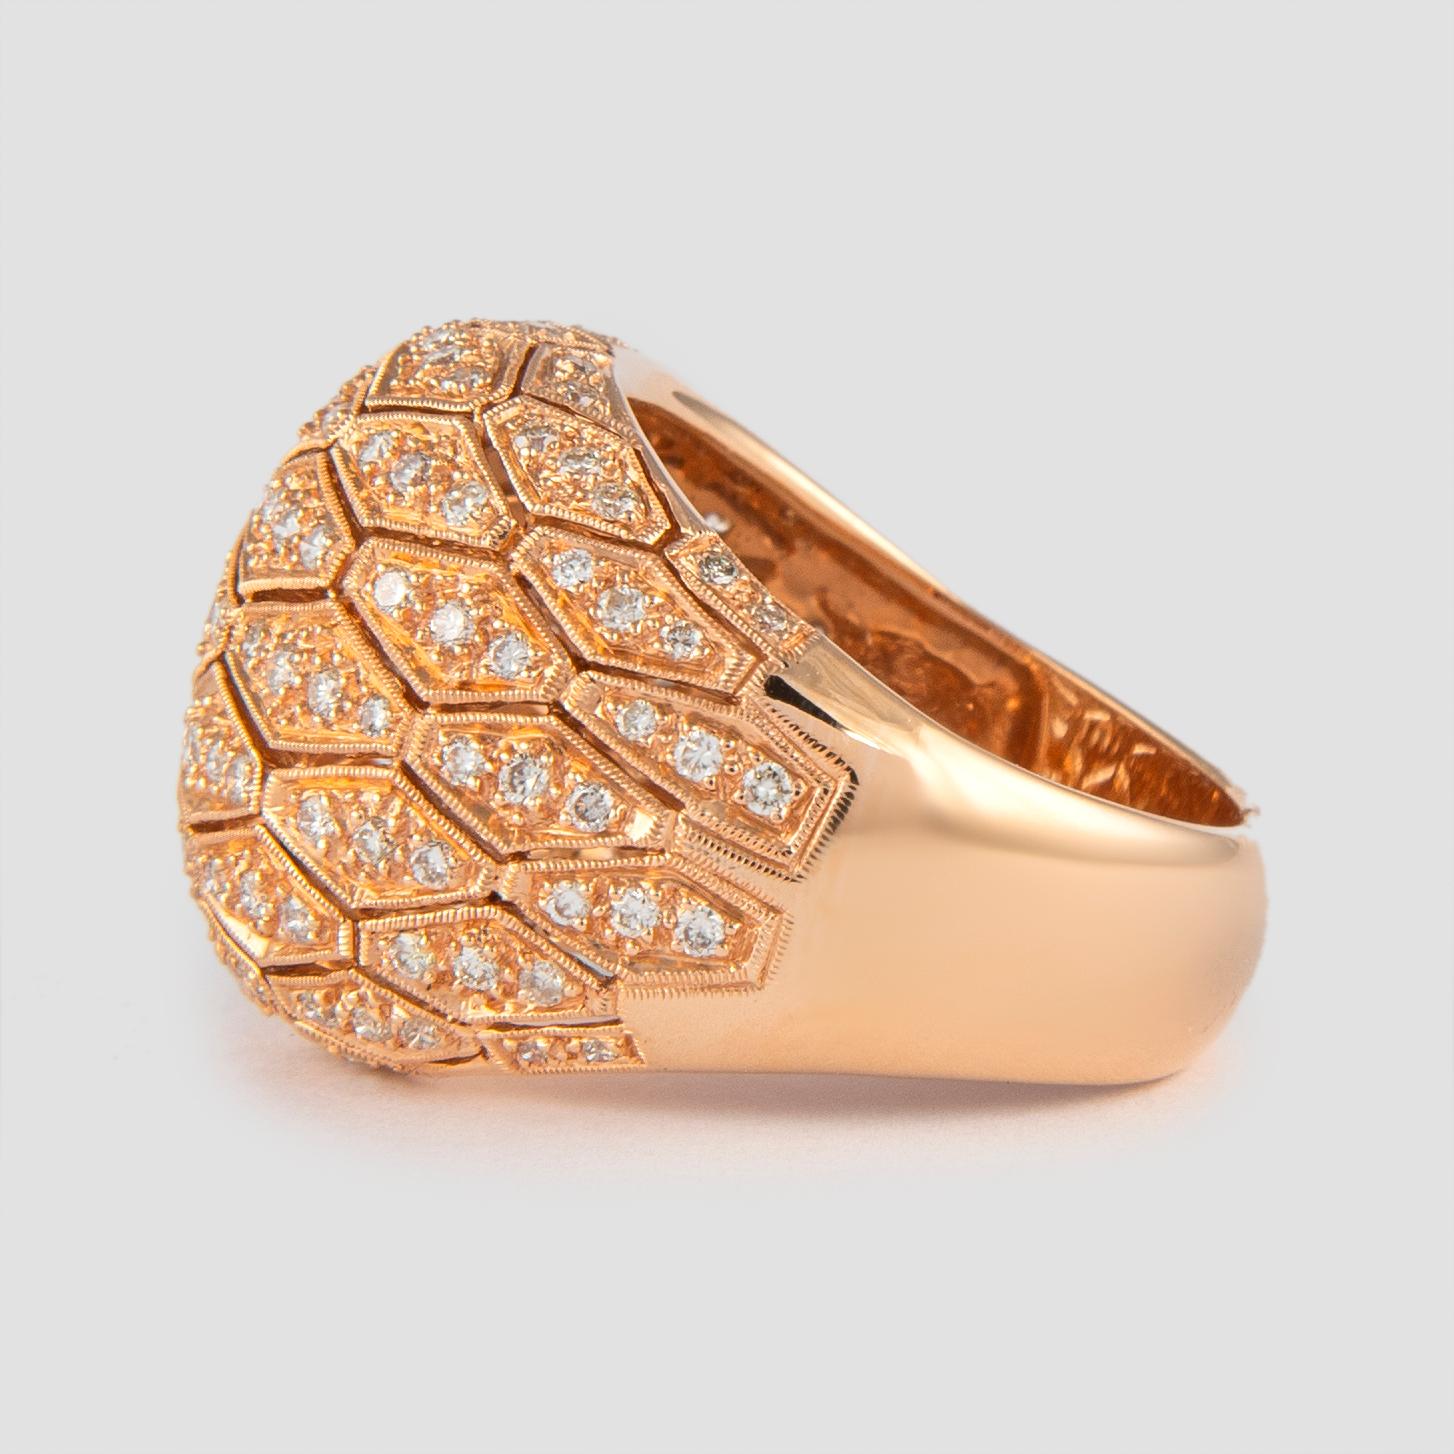 Round Cut 1.15 Carat Domed Diamond Patterned and 18 Karat Rose Gold Cocktail Ring For Sale